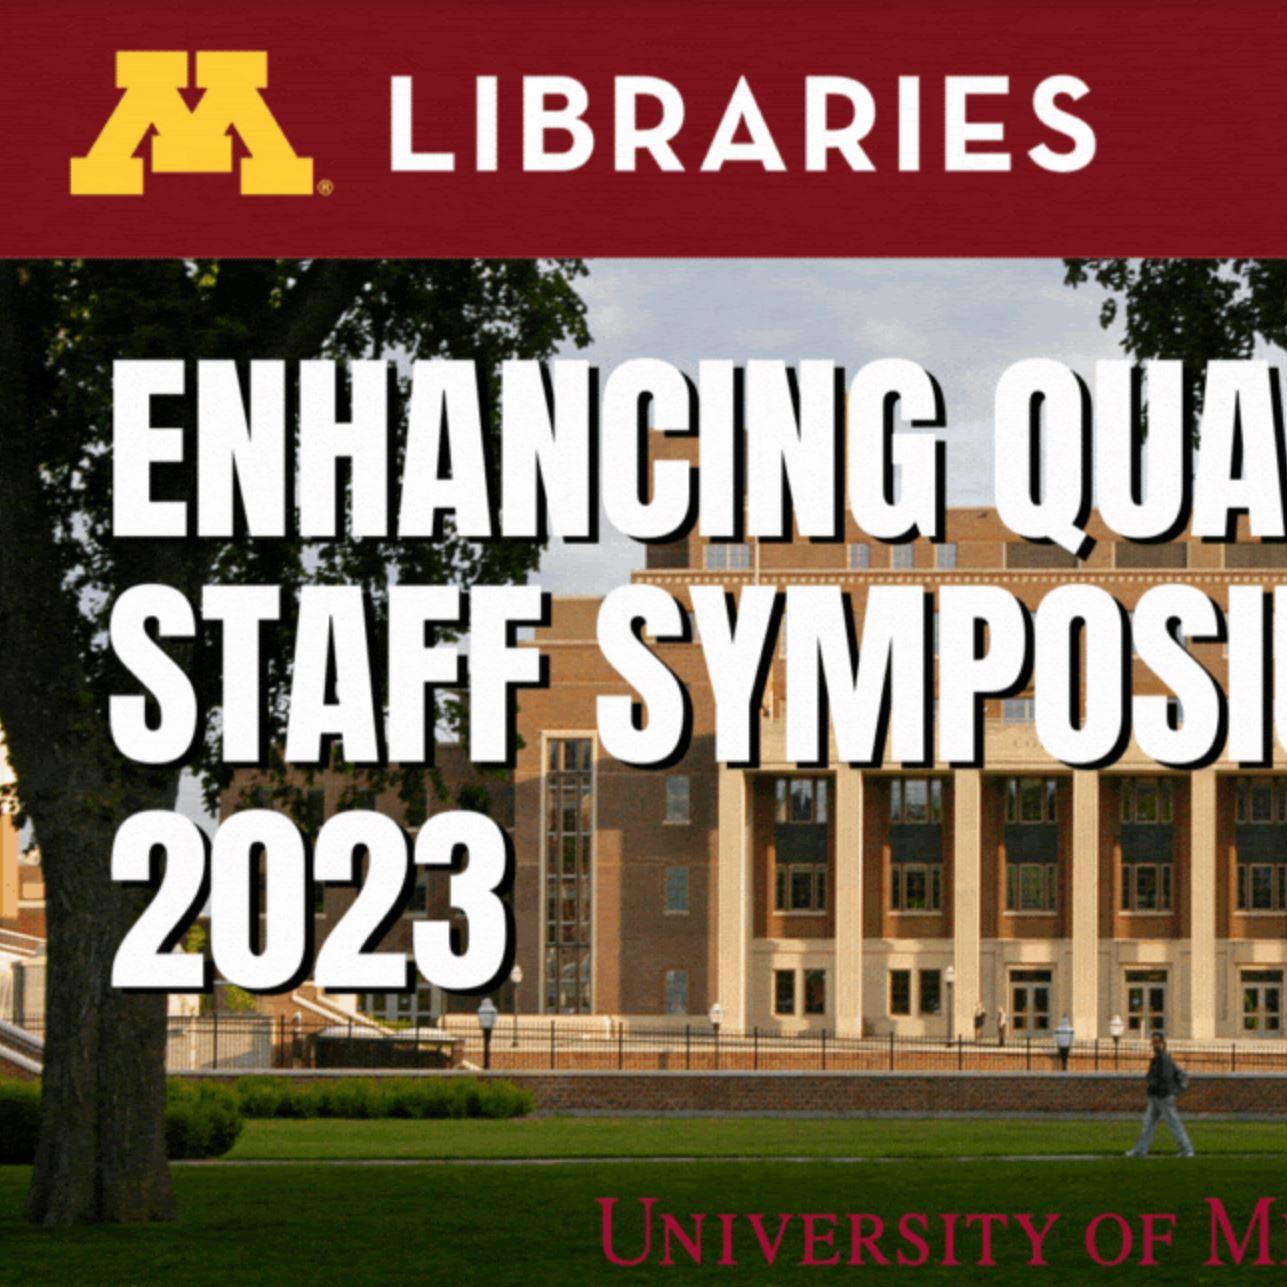 A graphic with the University of Minnesota Libraries wordmark above an image of Coffman Union that is overwritten by "Enhancing Quality Staff 2023, back by popular demand."